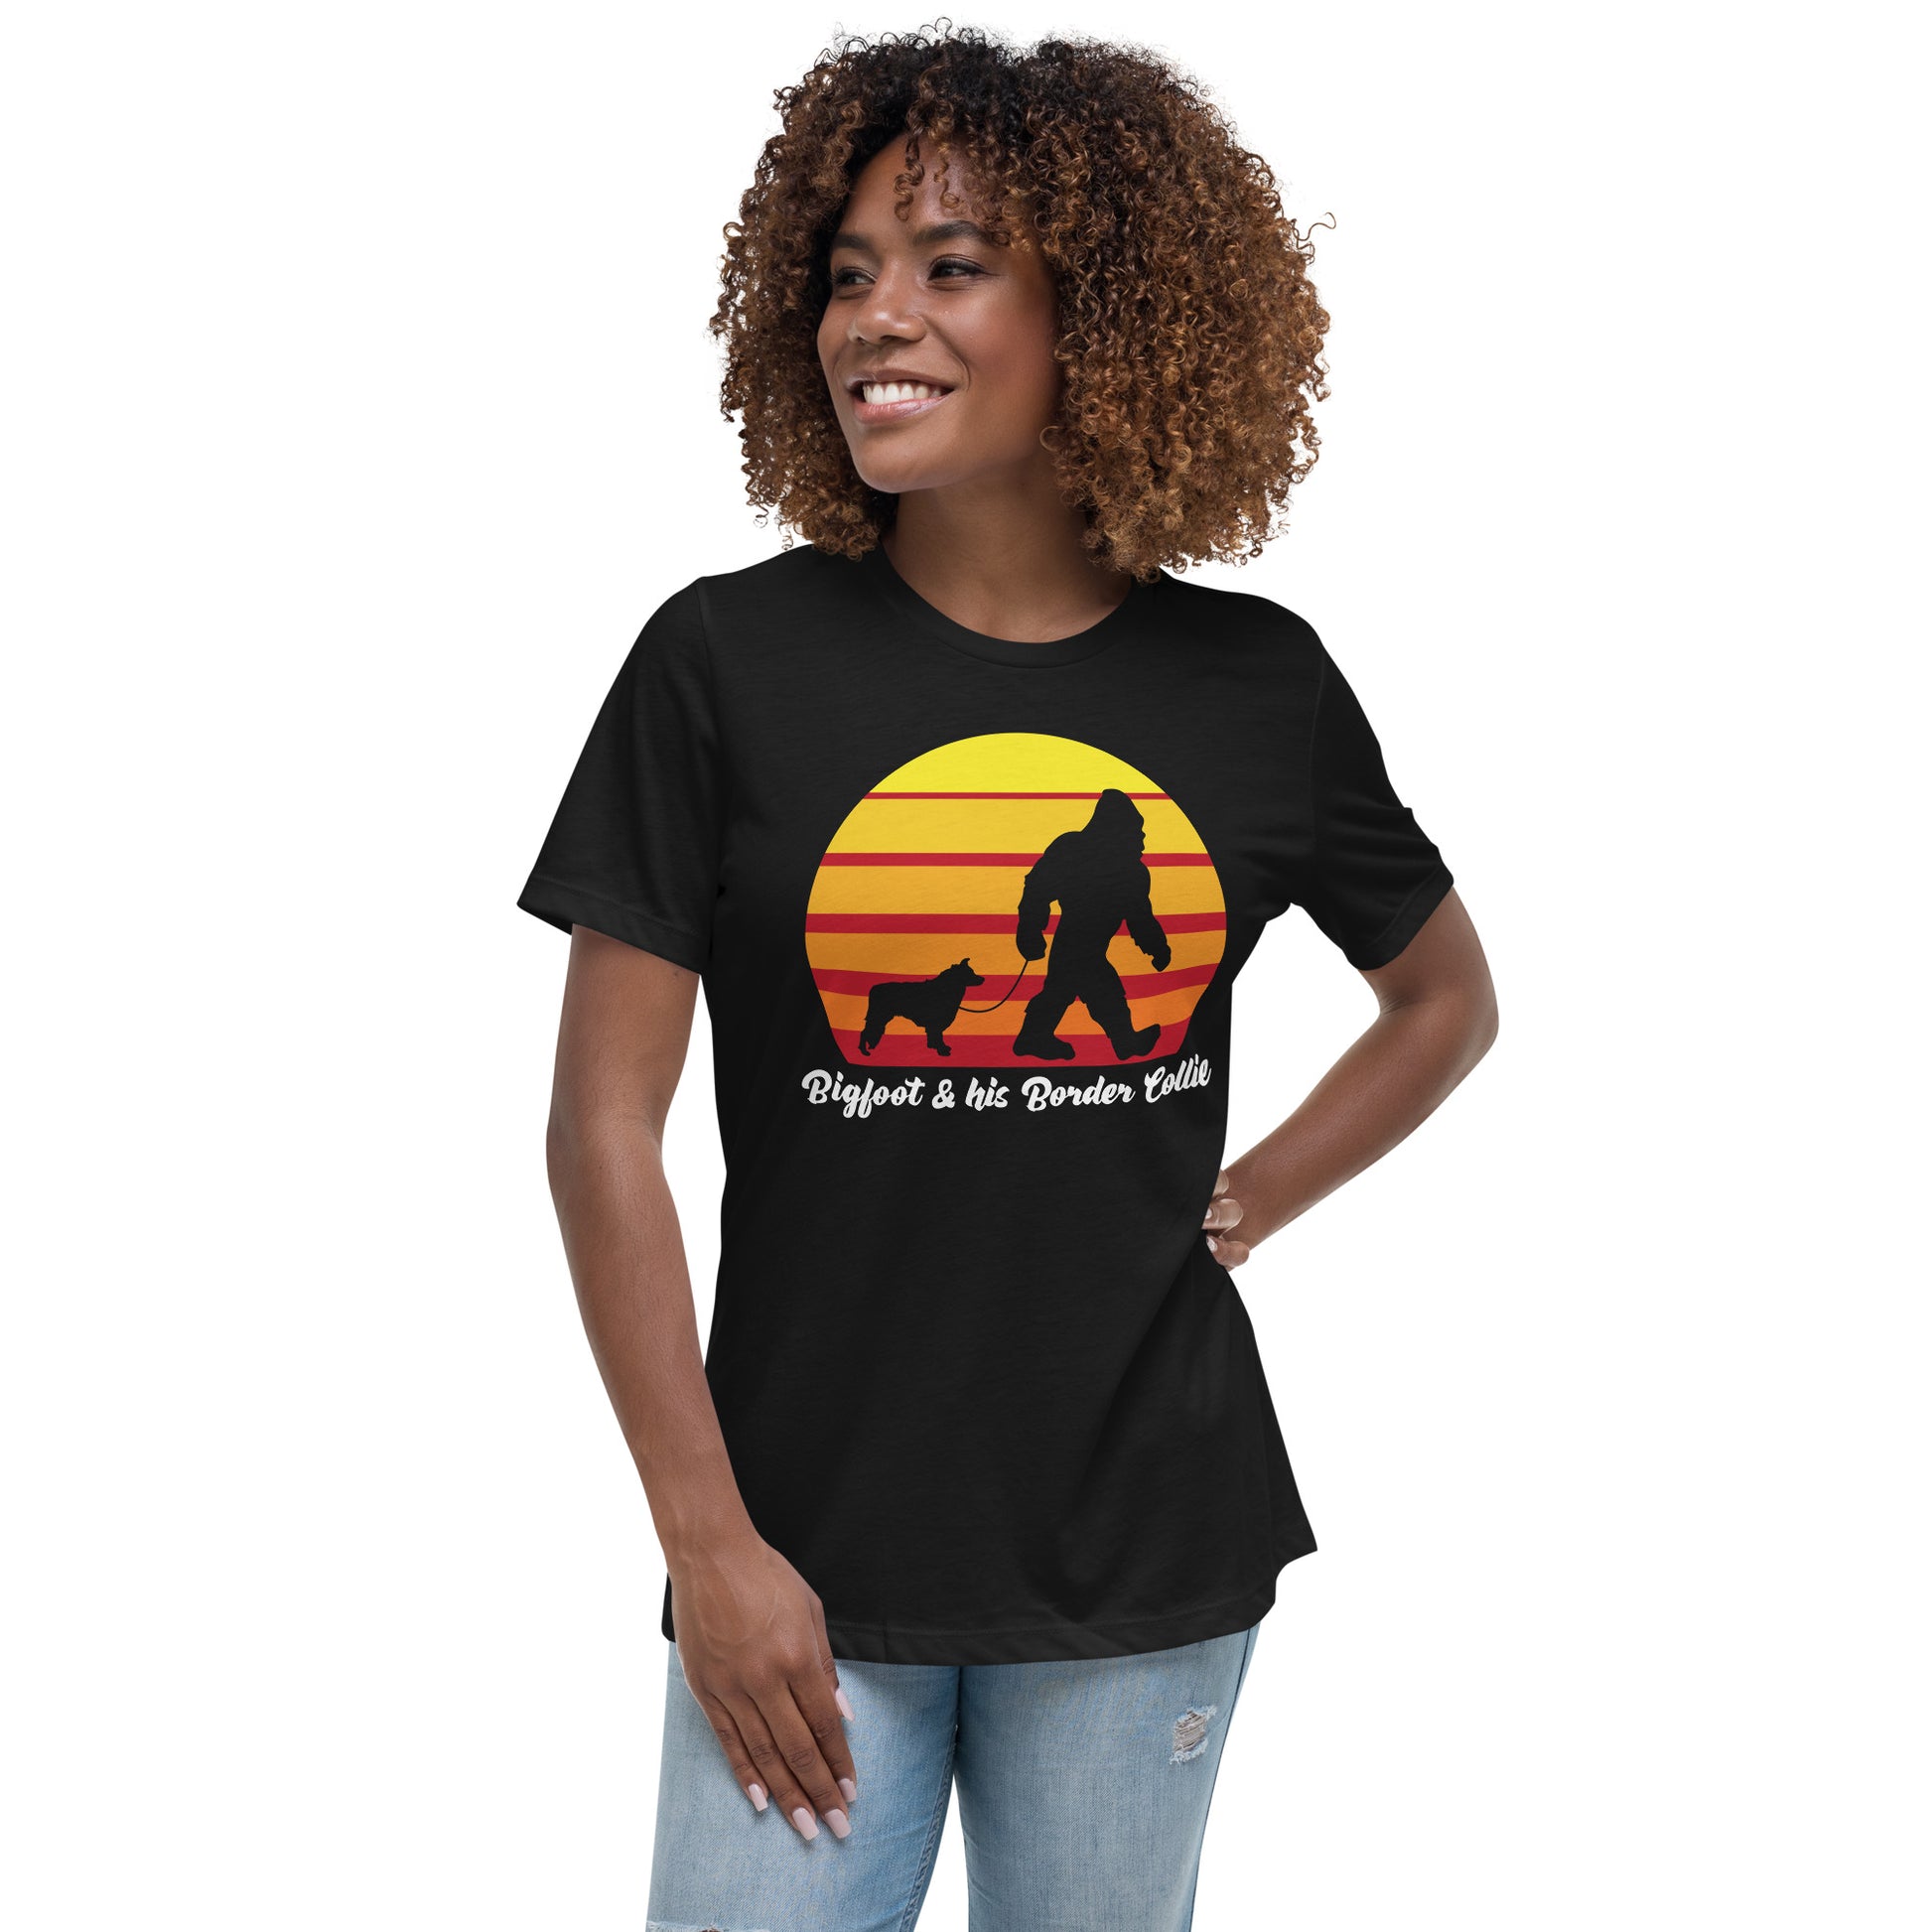 Big foot and his Border Collie women’s black t-shirt by Dog Artistry.